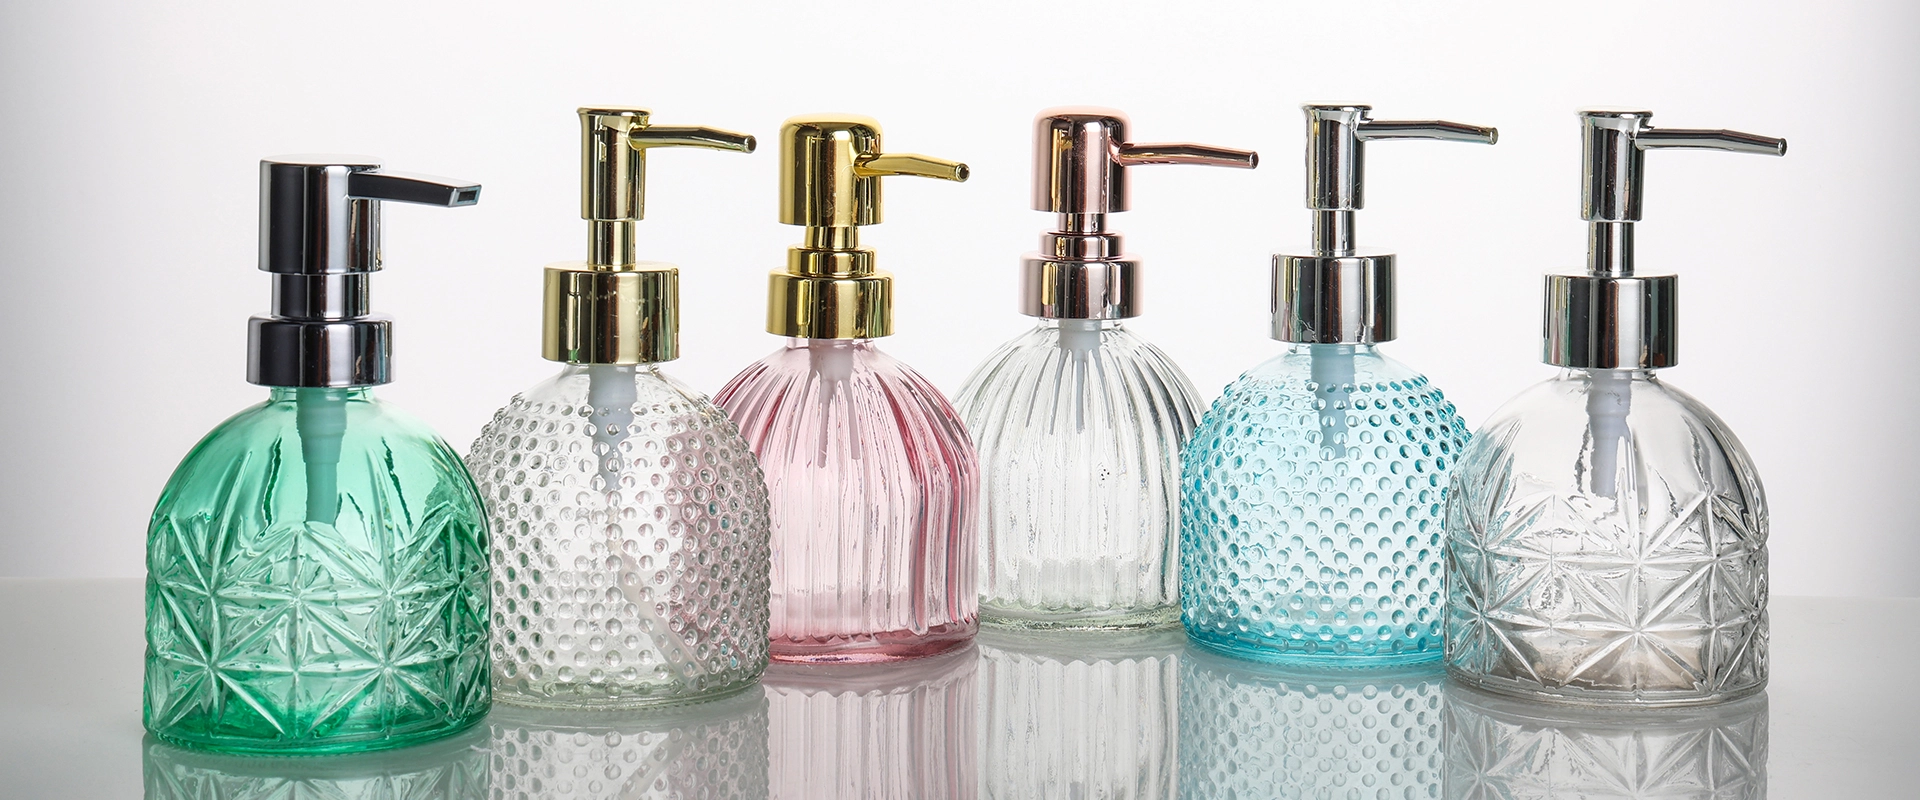 What Types Of Bathroom Goods Are Commonly Packaged In Glass Bottles?